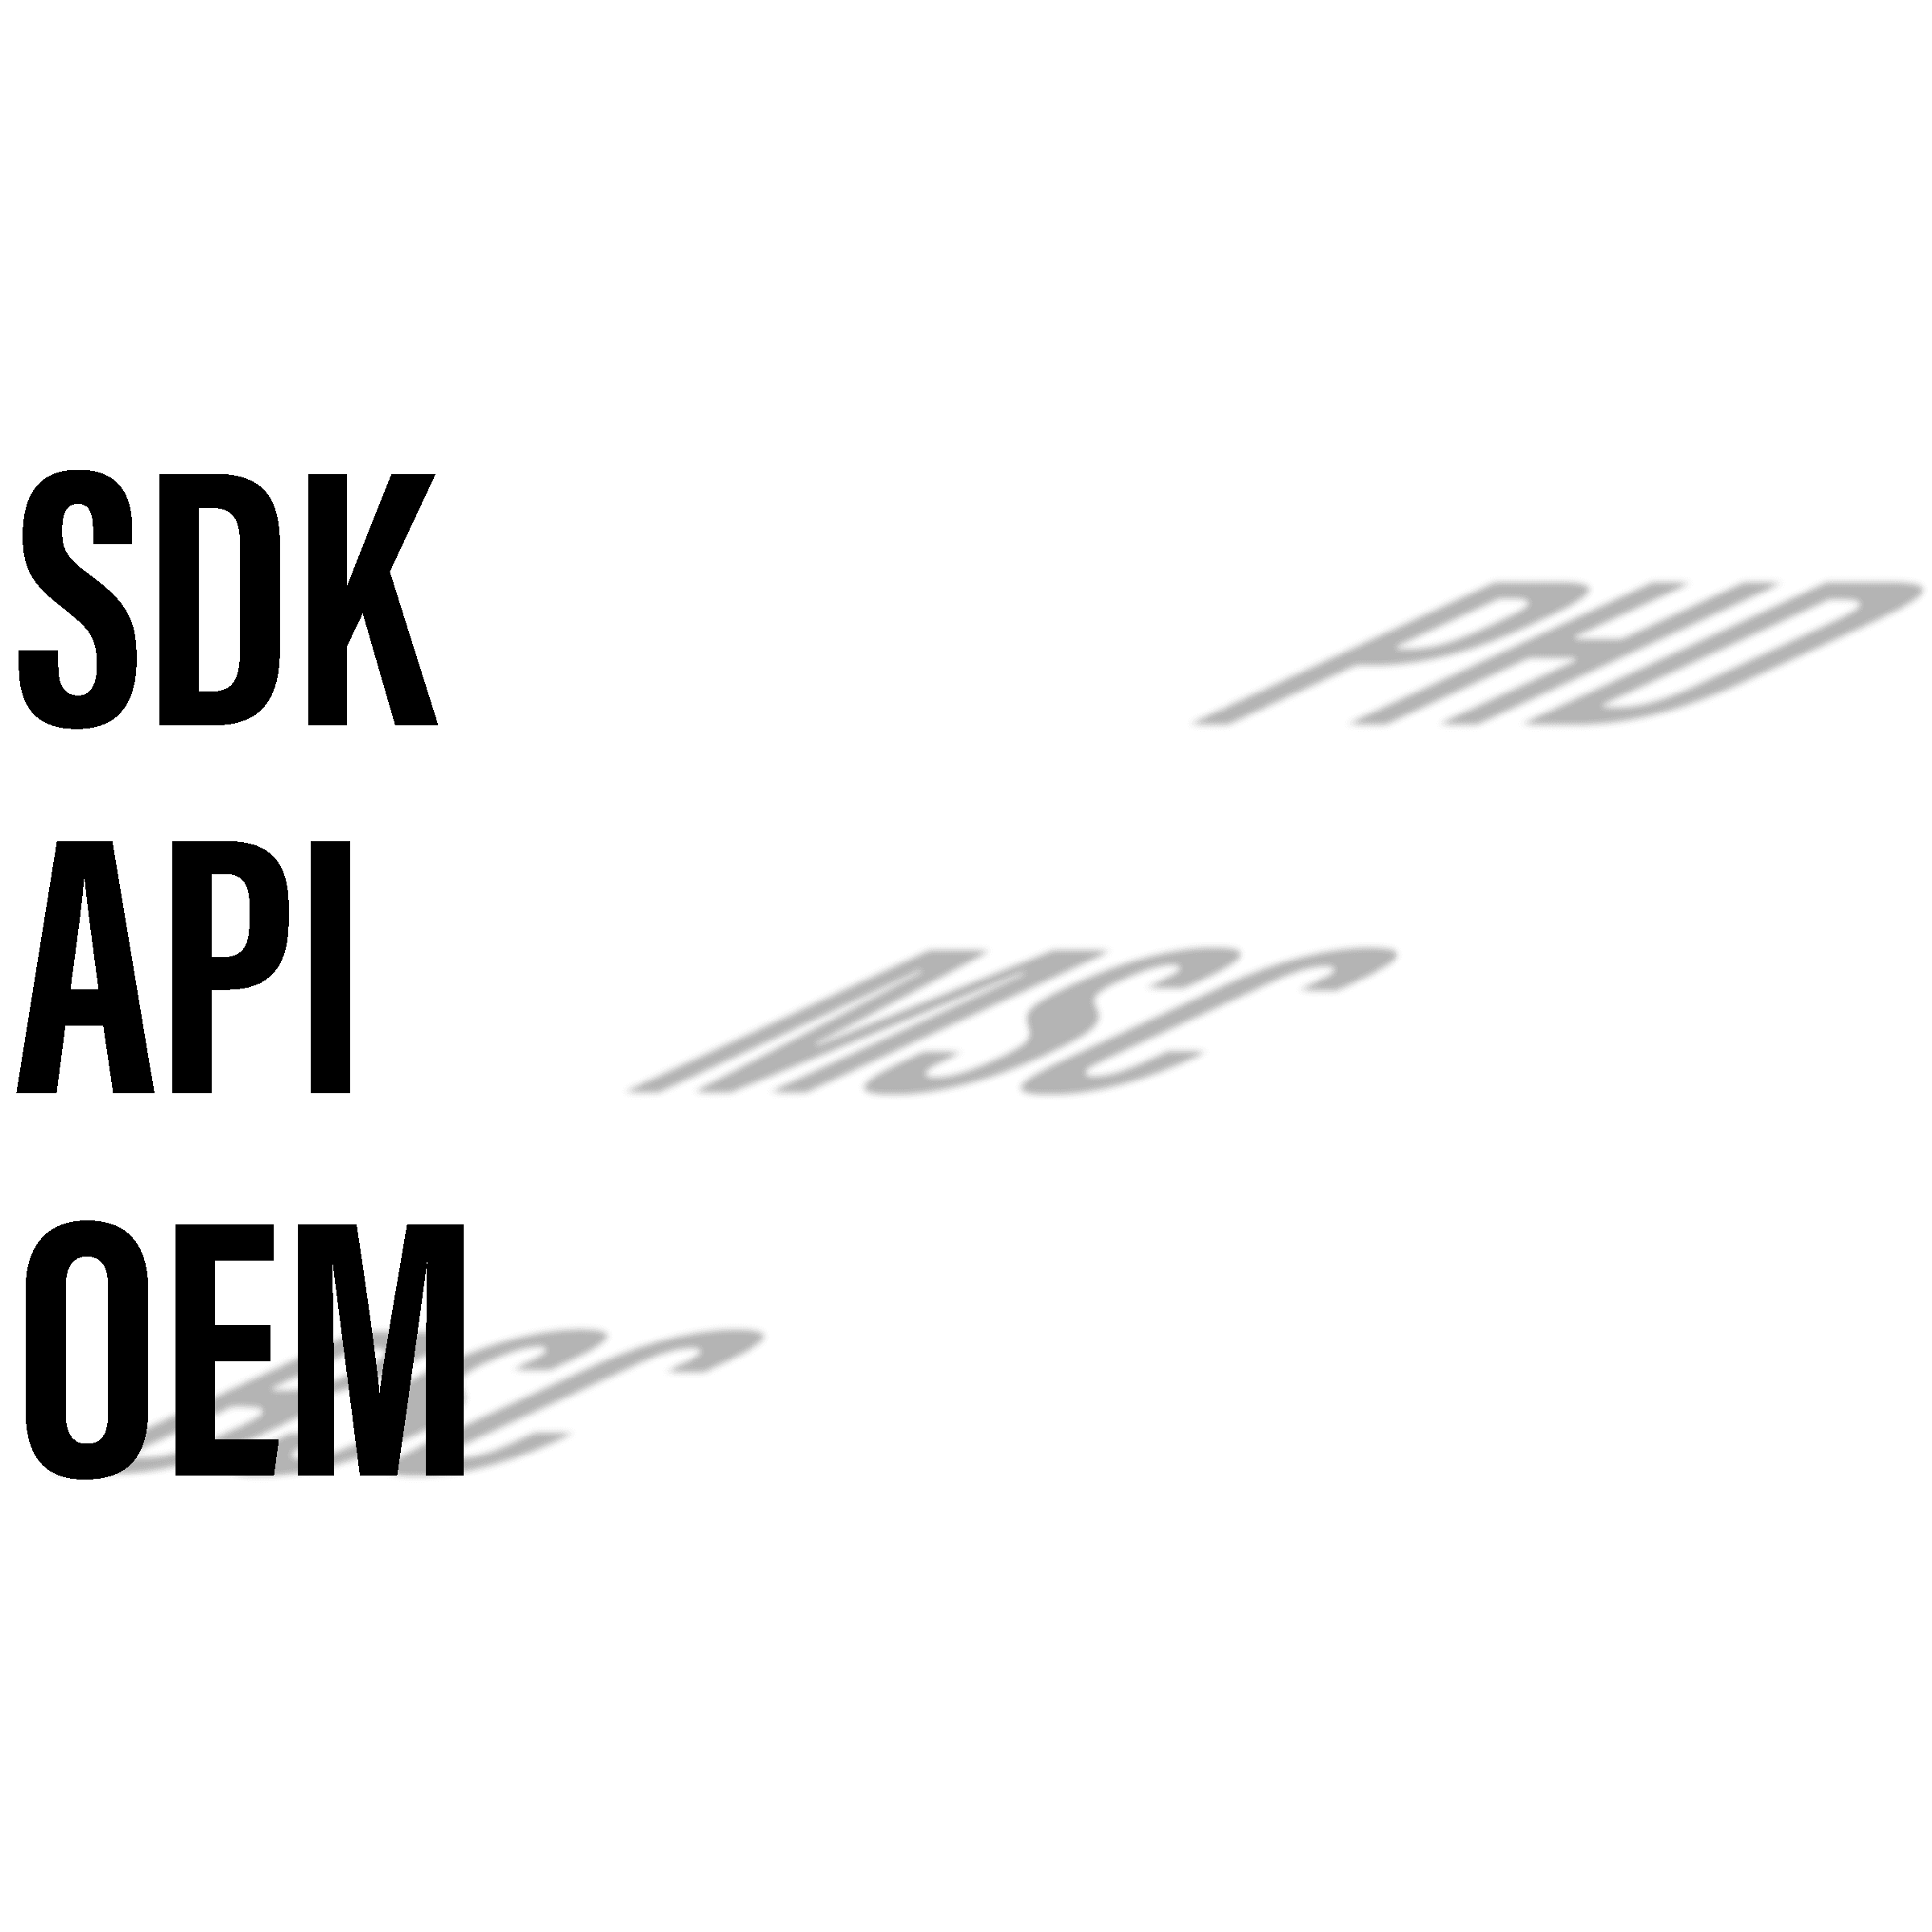 Use of SDK's and API's in developing a software package